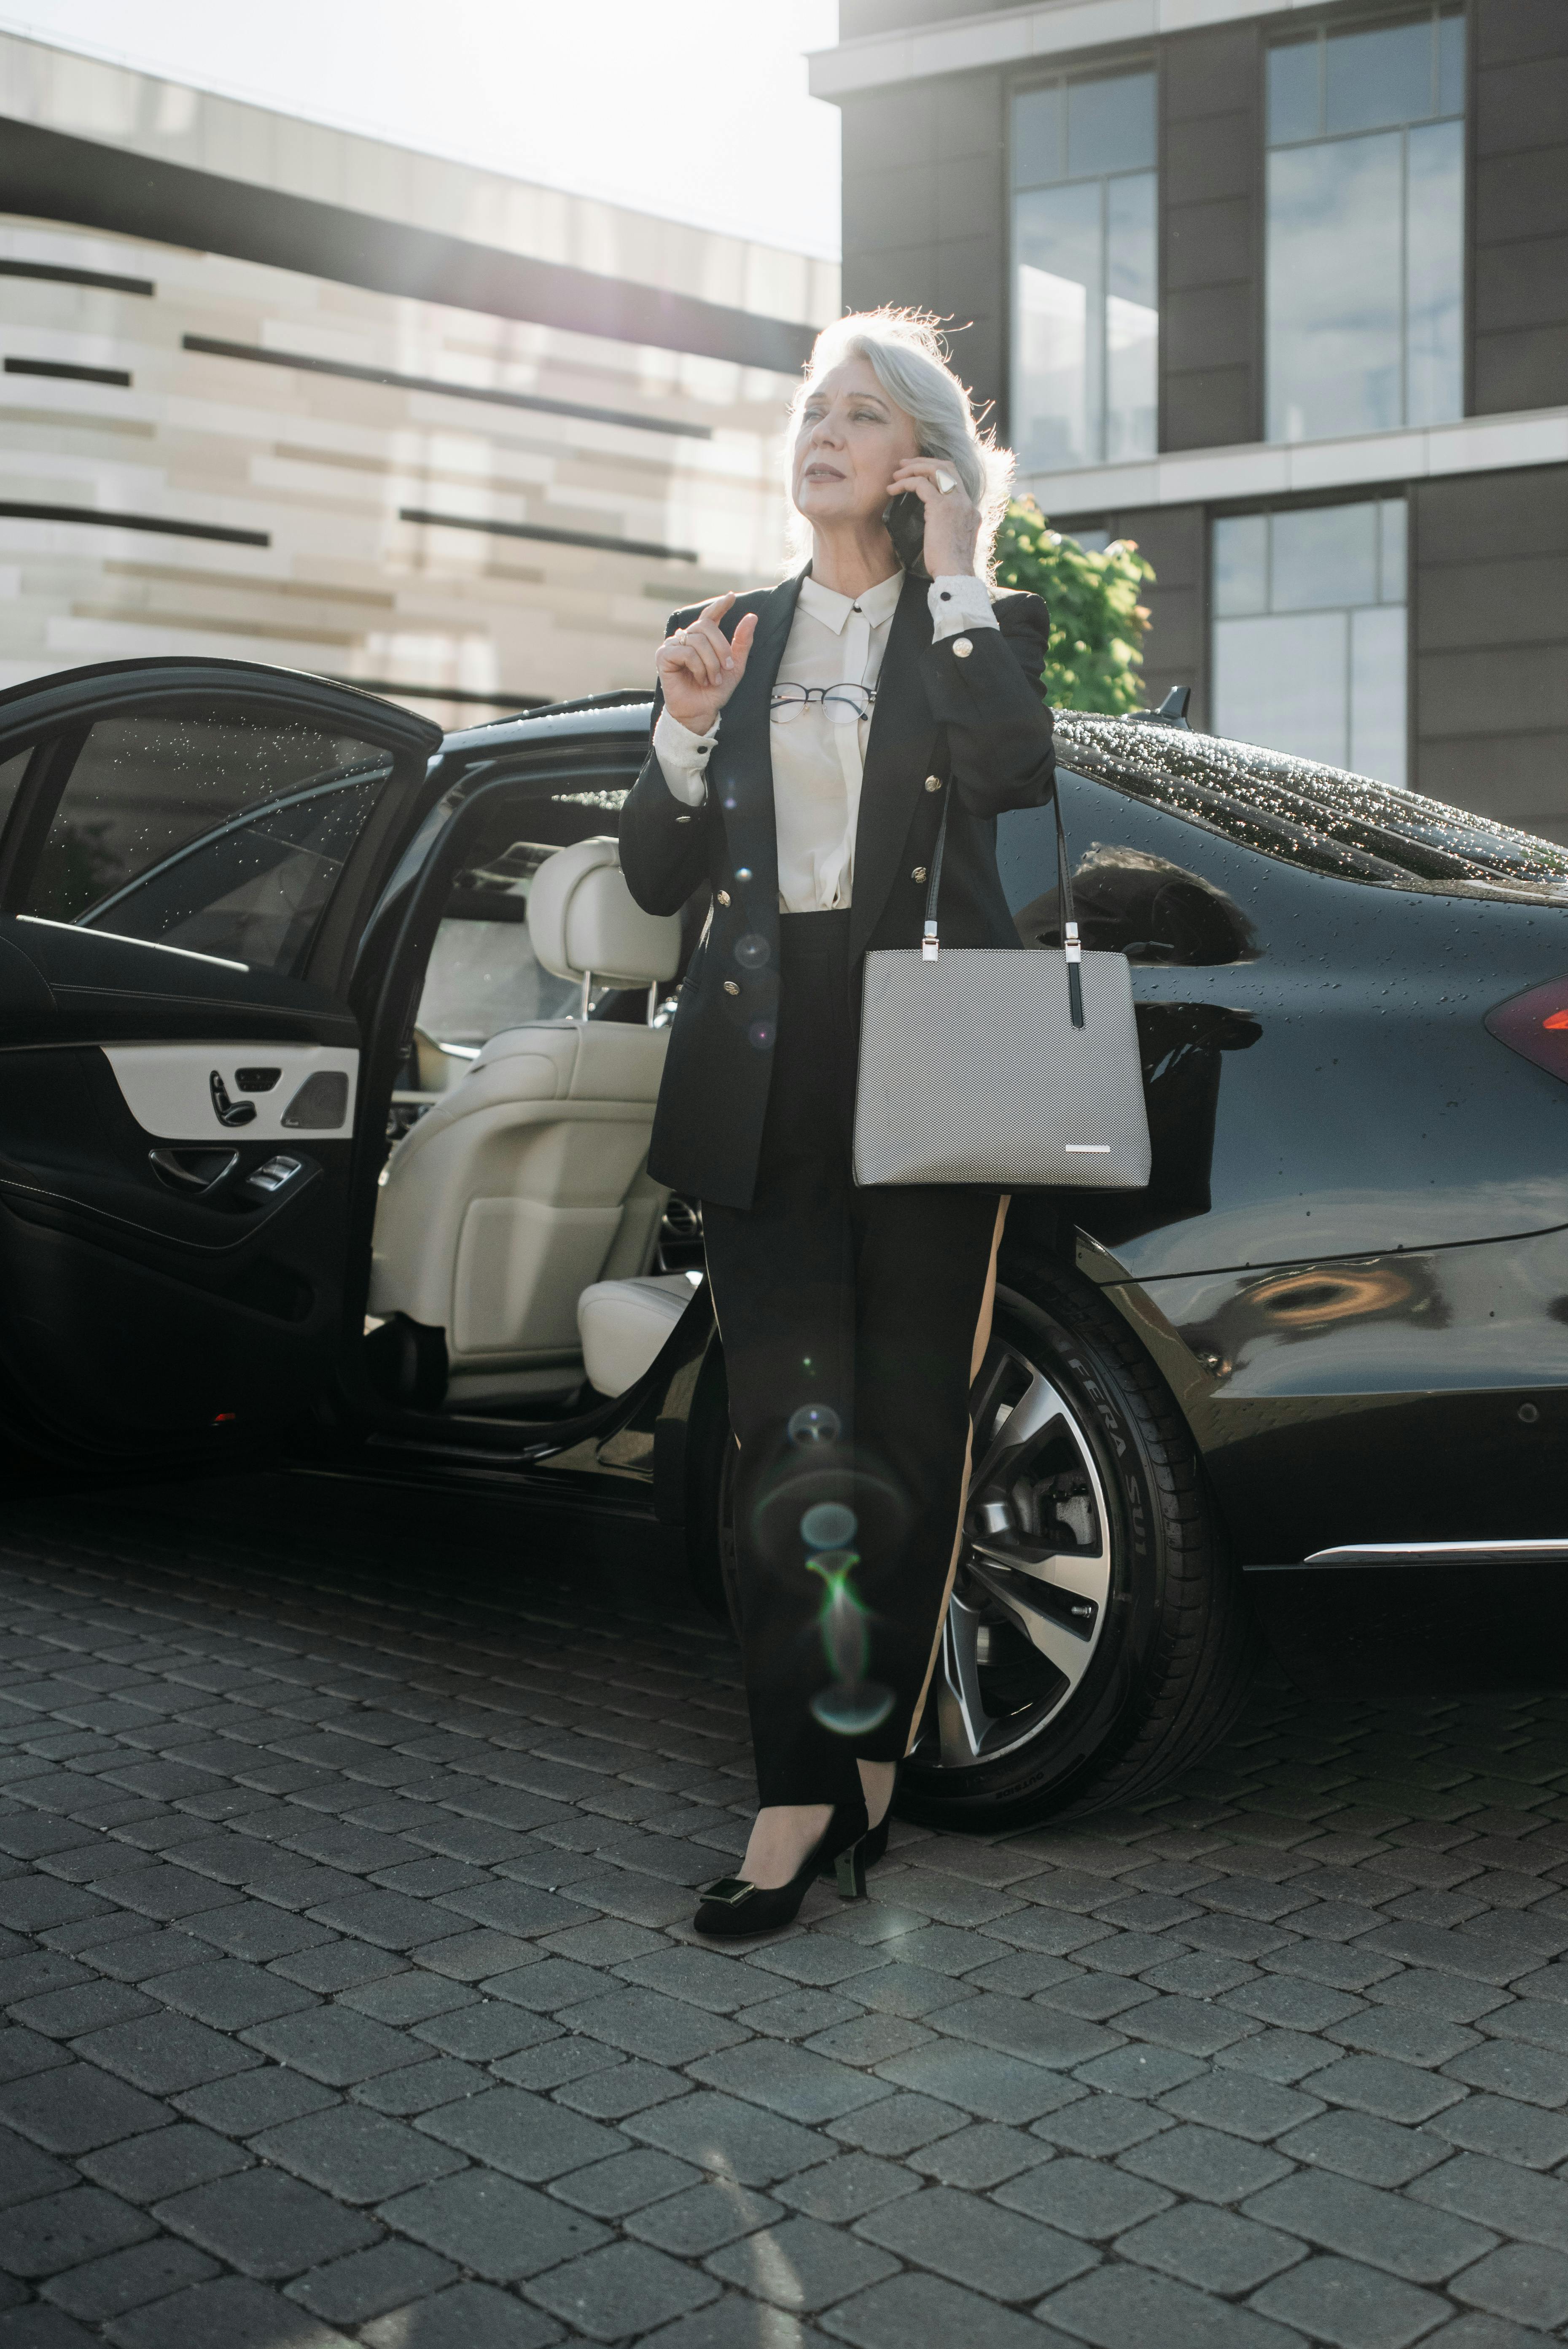 A woman standing next to an expensive car | Source: Pexels